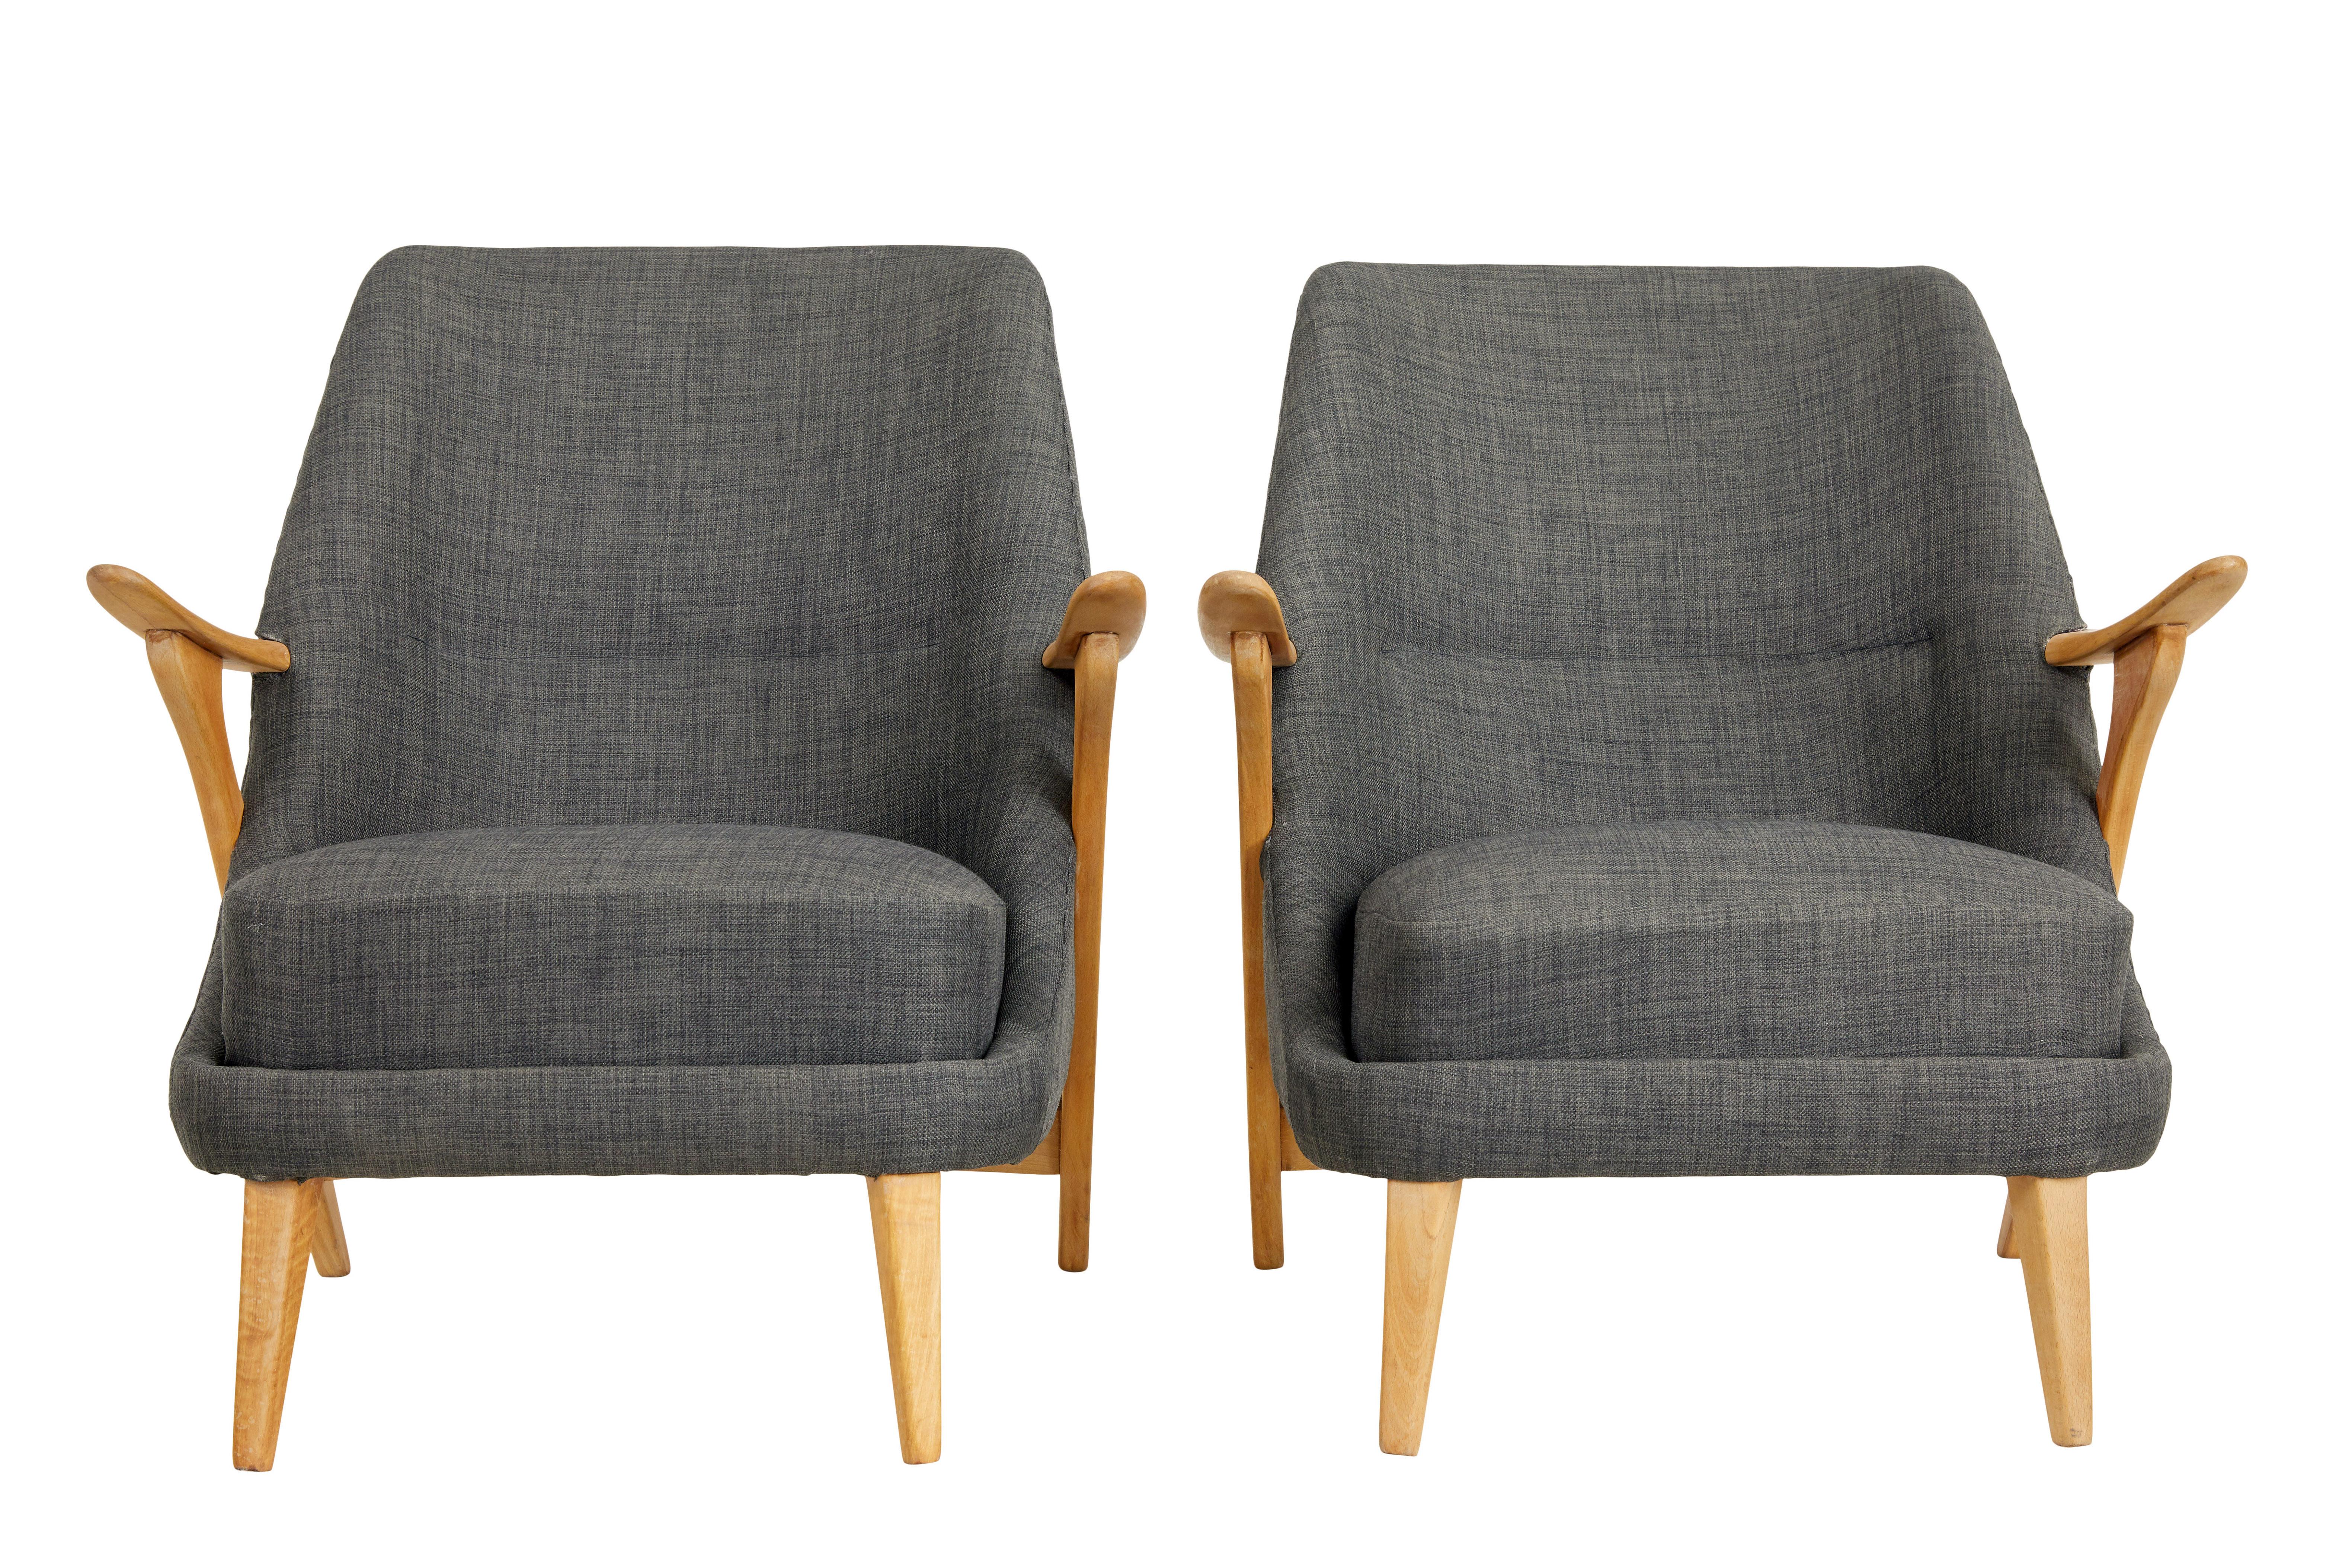 Fine quality pair of beech armchairs designed by svante skogh for seffle mobelfabrik, circa 1960.

Skogh worked for a number of furniture producers during the 1950's and 1960's, known for his flowing lines these chairs were designed for seffle